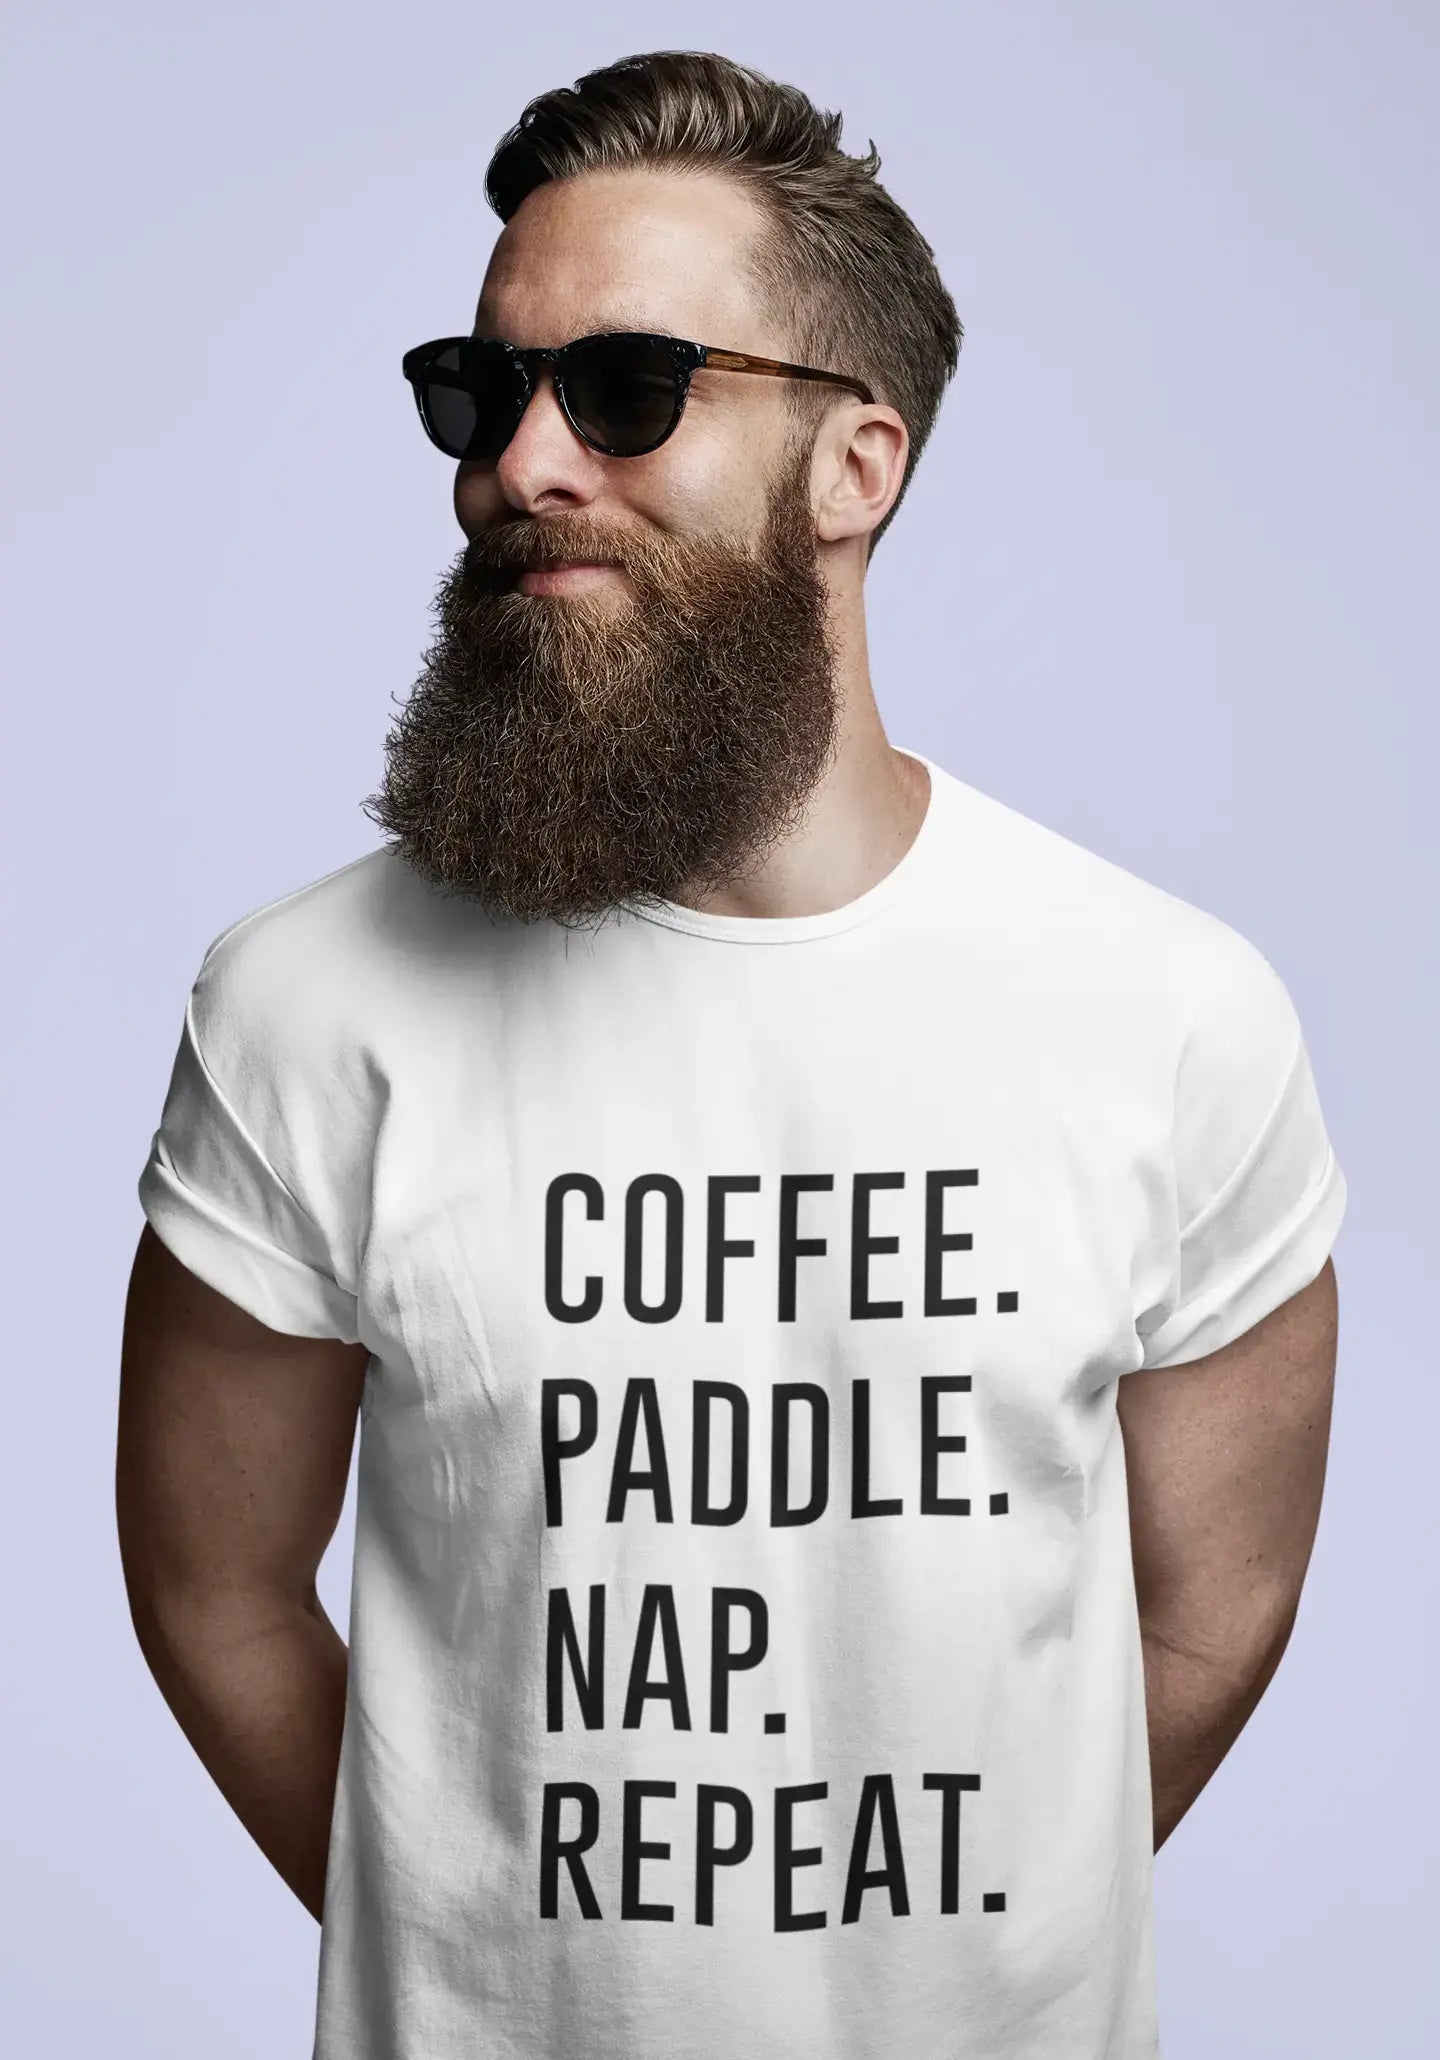 COFFEE PADDLE NAP REPEAT Men's Short Sleeve Round Neck T-shirt 00058